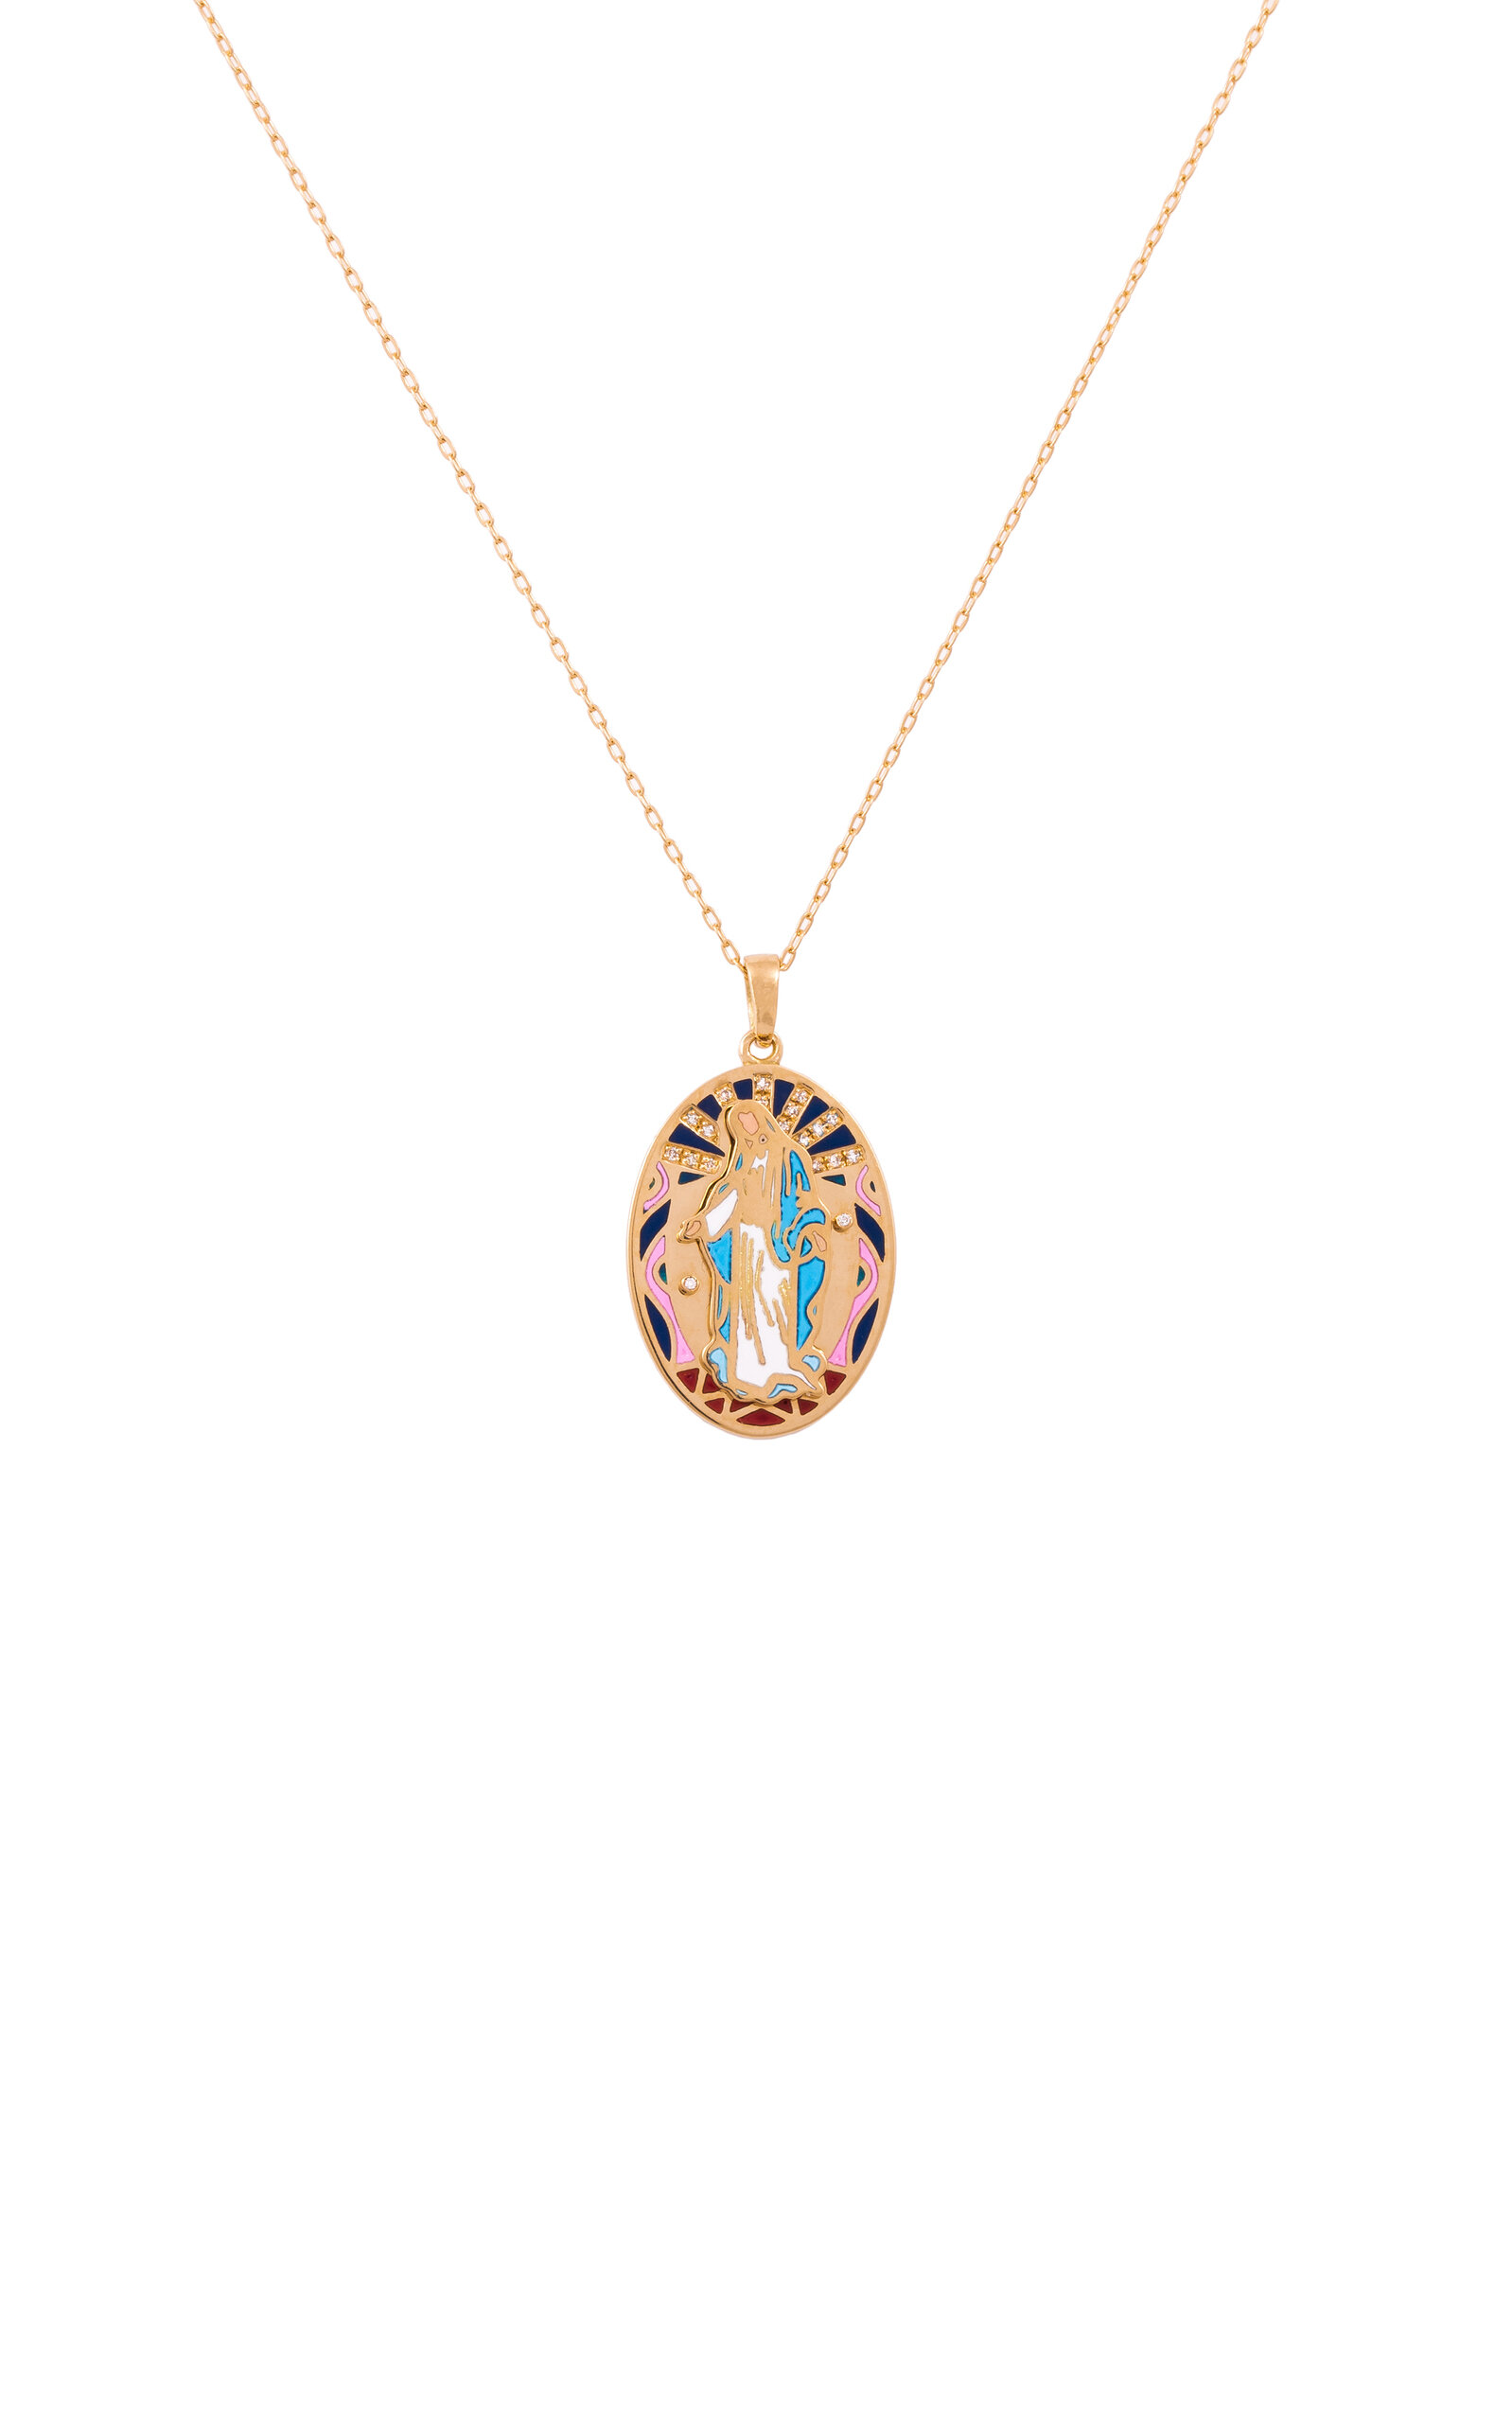 18K Yellow Gold Big Celestial Mary Diamond and Colored Enamel Necklace